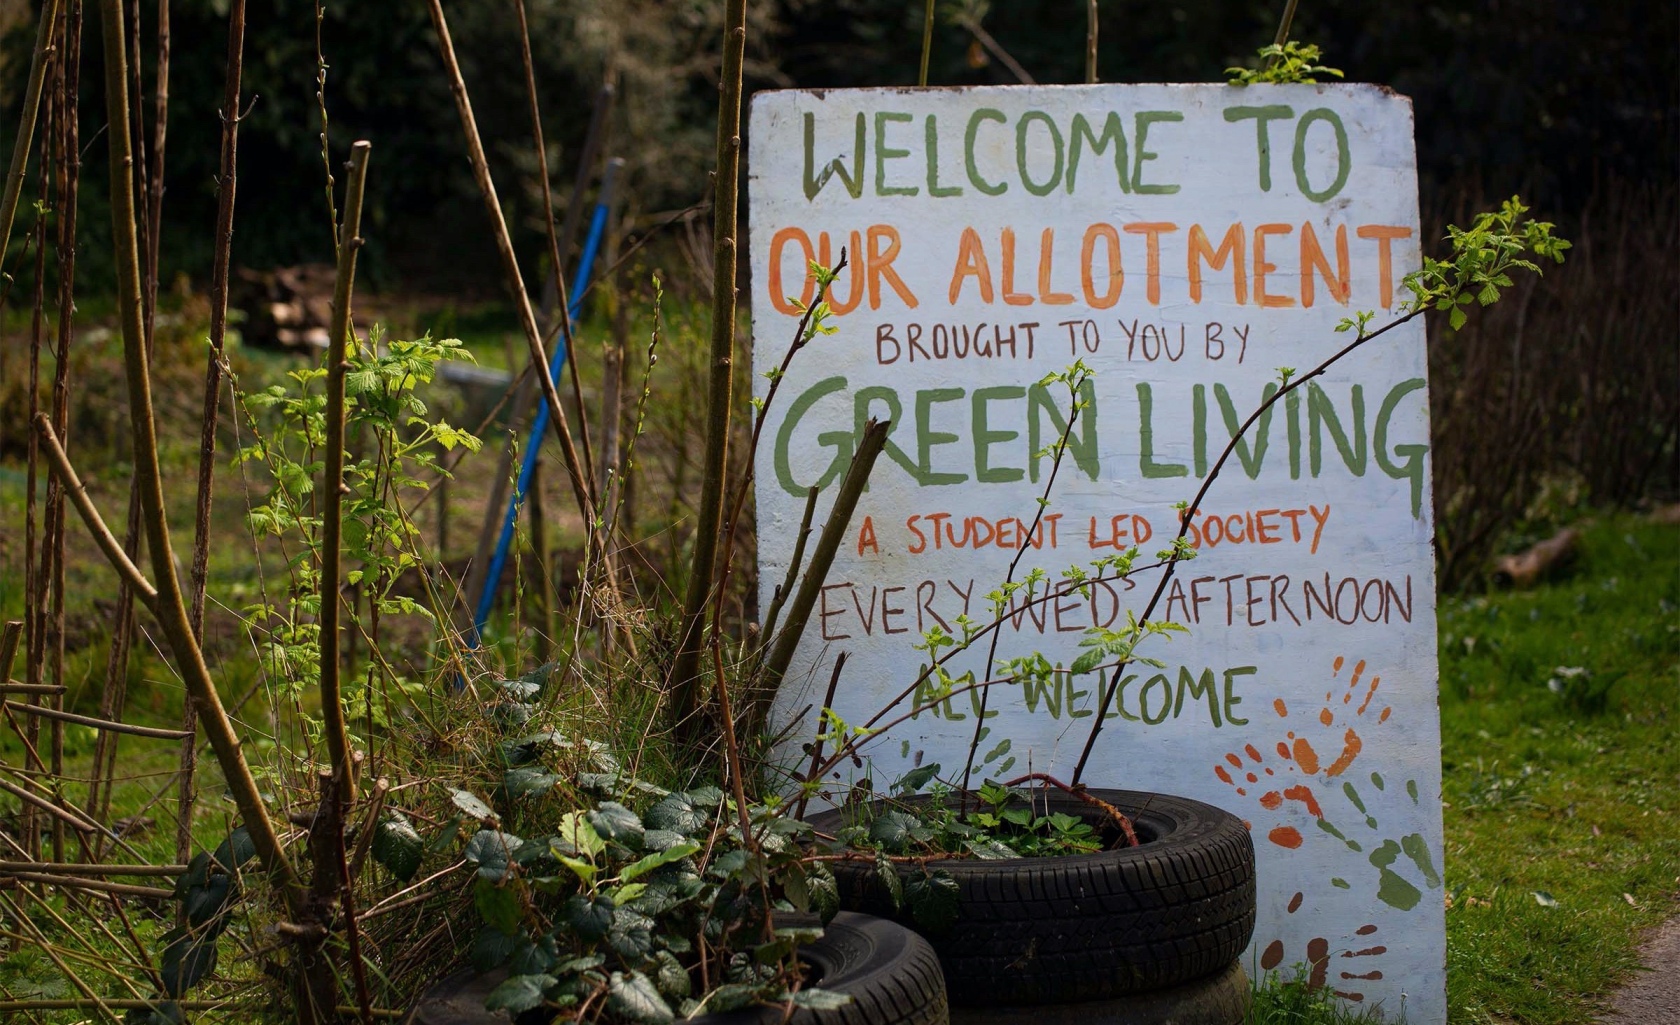 Welcome to our allotment, brought to you by 'Green Living' a student society